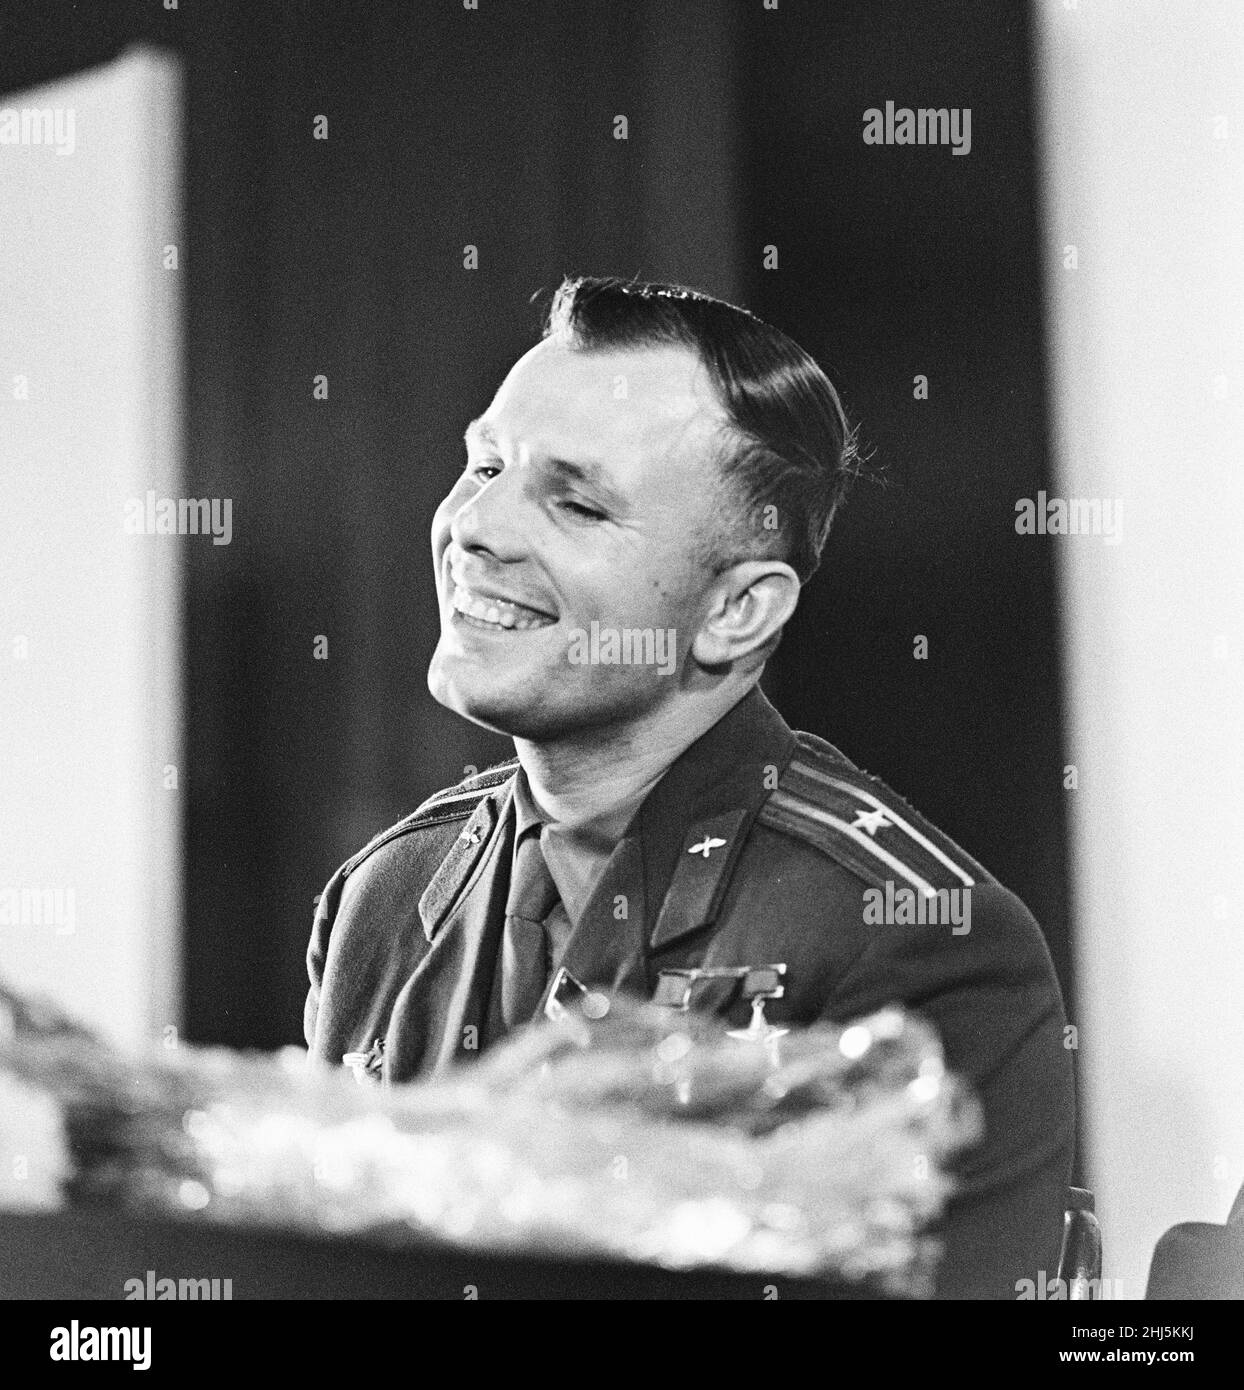 Yuri Gagarin,  Soviet Cosmonaut, the first human to journey into outer space when his Vostok spacecraft completed an orbit of the Earth (12th April 1961), visits Britain, Tuesday 11th July 1961. Our picture shows ... Yuri Gagarin attends news press conference at the Russian Embassy, Kensington Palace Gardens, London. Stock Photo